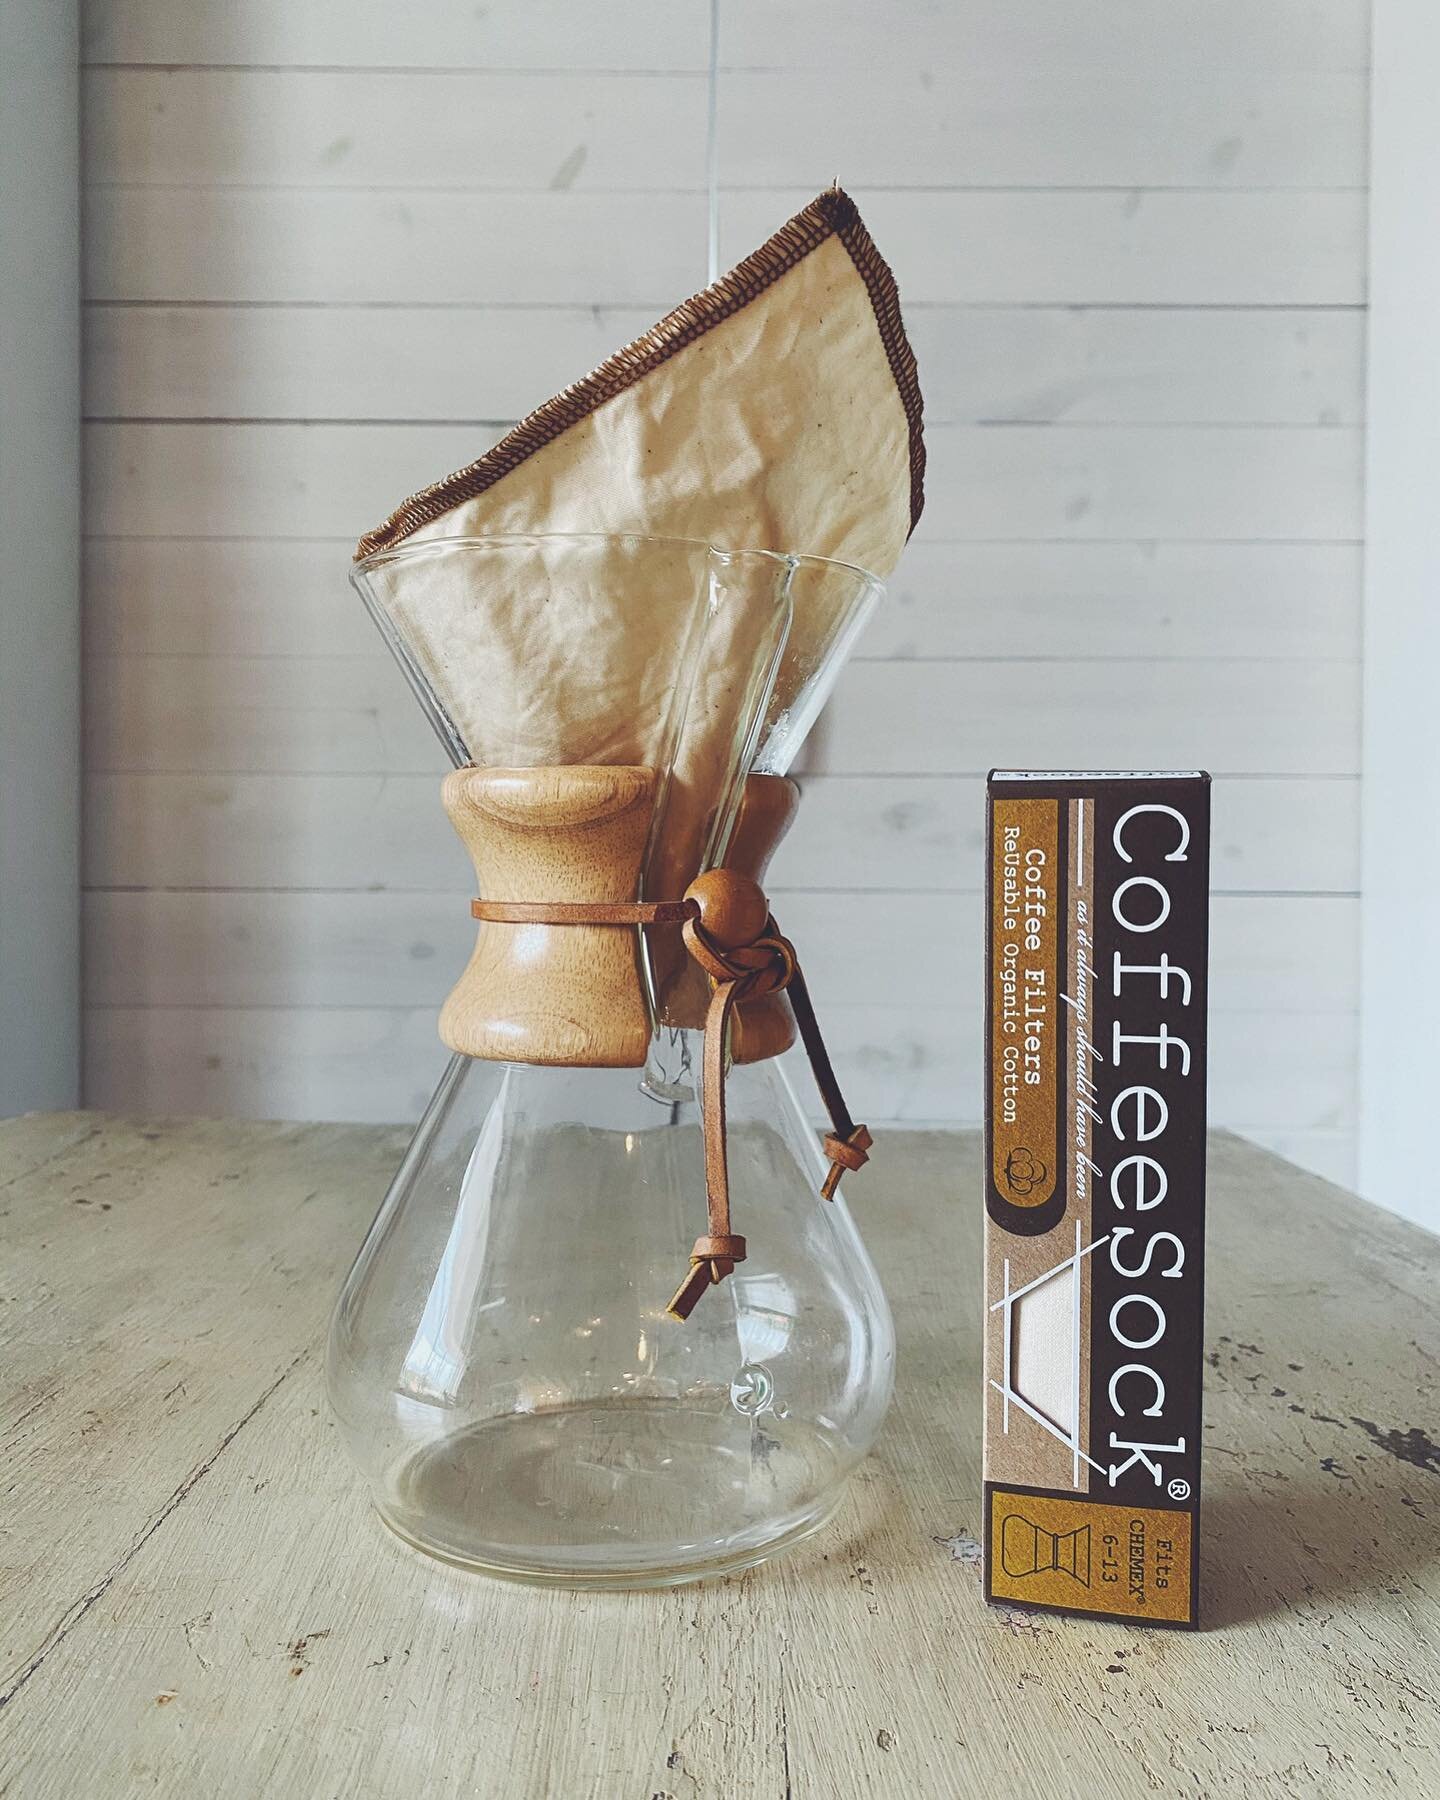 Classic #chemex ✨ 
We are proud to offer an honest, organic, premium product that is made from quality materials, by skilled hands, in Austin Texas. We are confident that you will find our filters deliver a rich and balanced brew, superior to paper, 